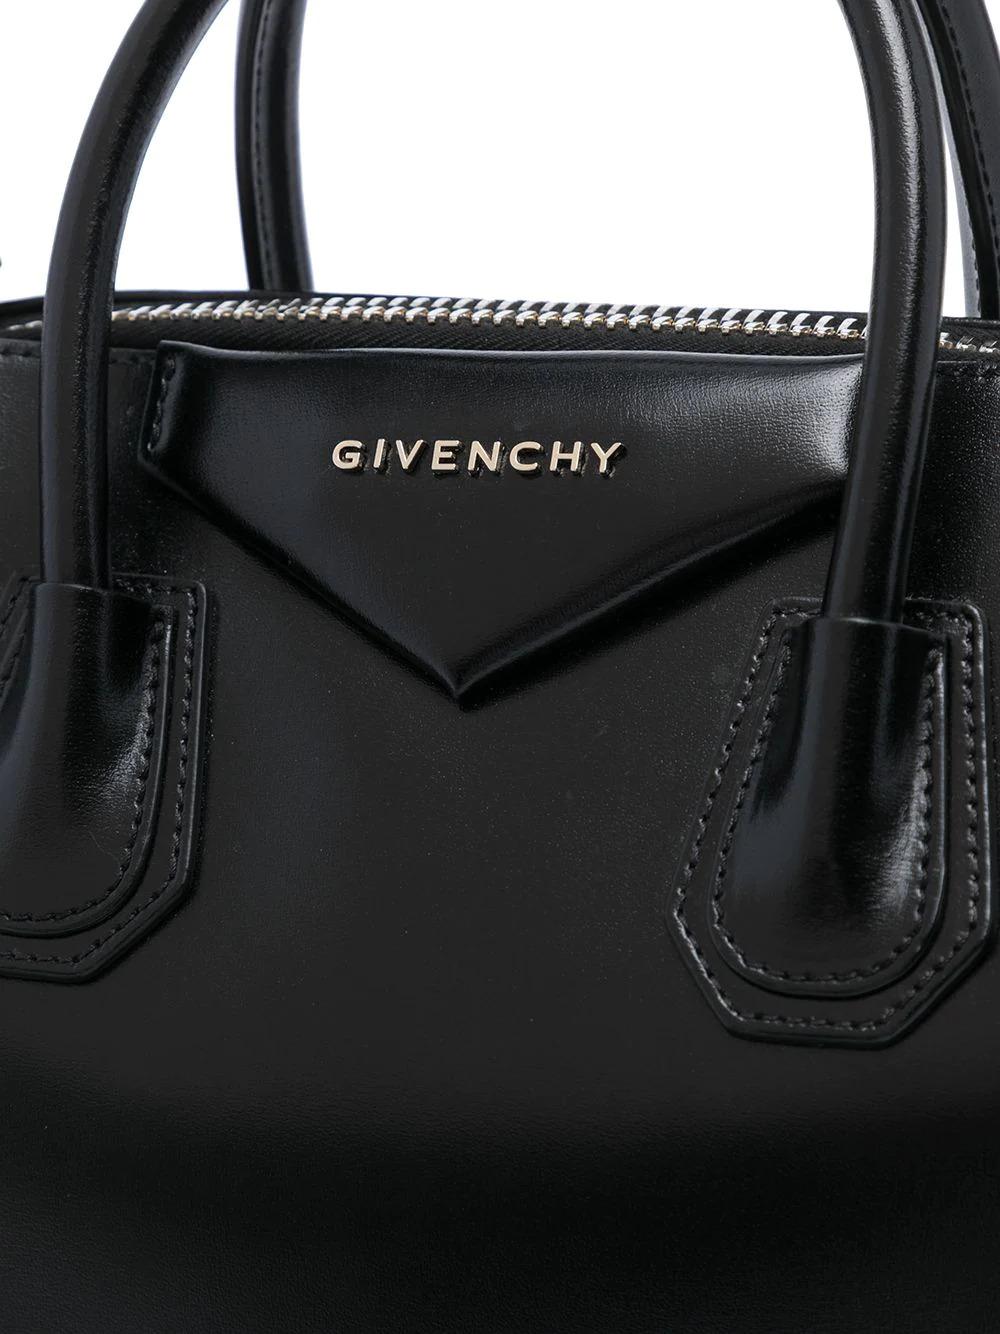 The Givenchy Antigona bag was first designed in 2011 by Ricardo Tisci. Over the last 10 years, the versatile and sophisticated Antigona bag has become one of the house classics. With a minimalist design, structure and practical interior, this bag is